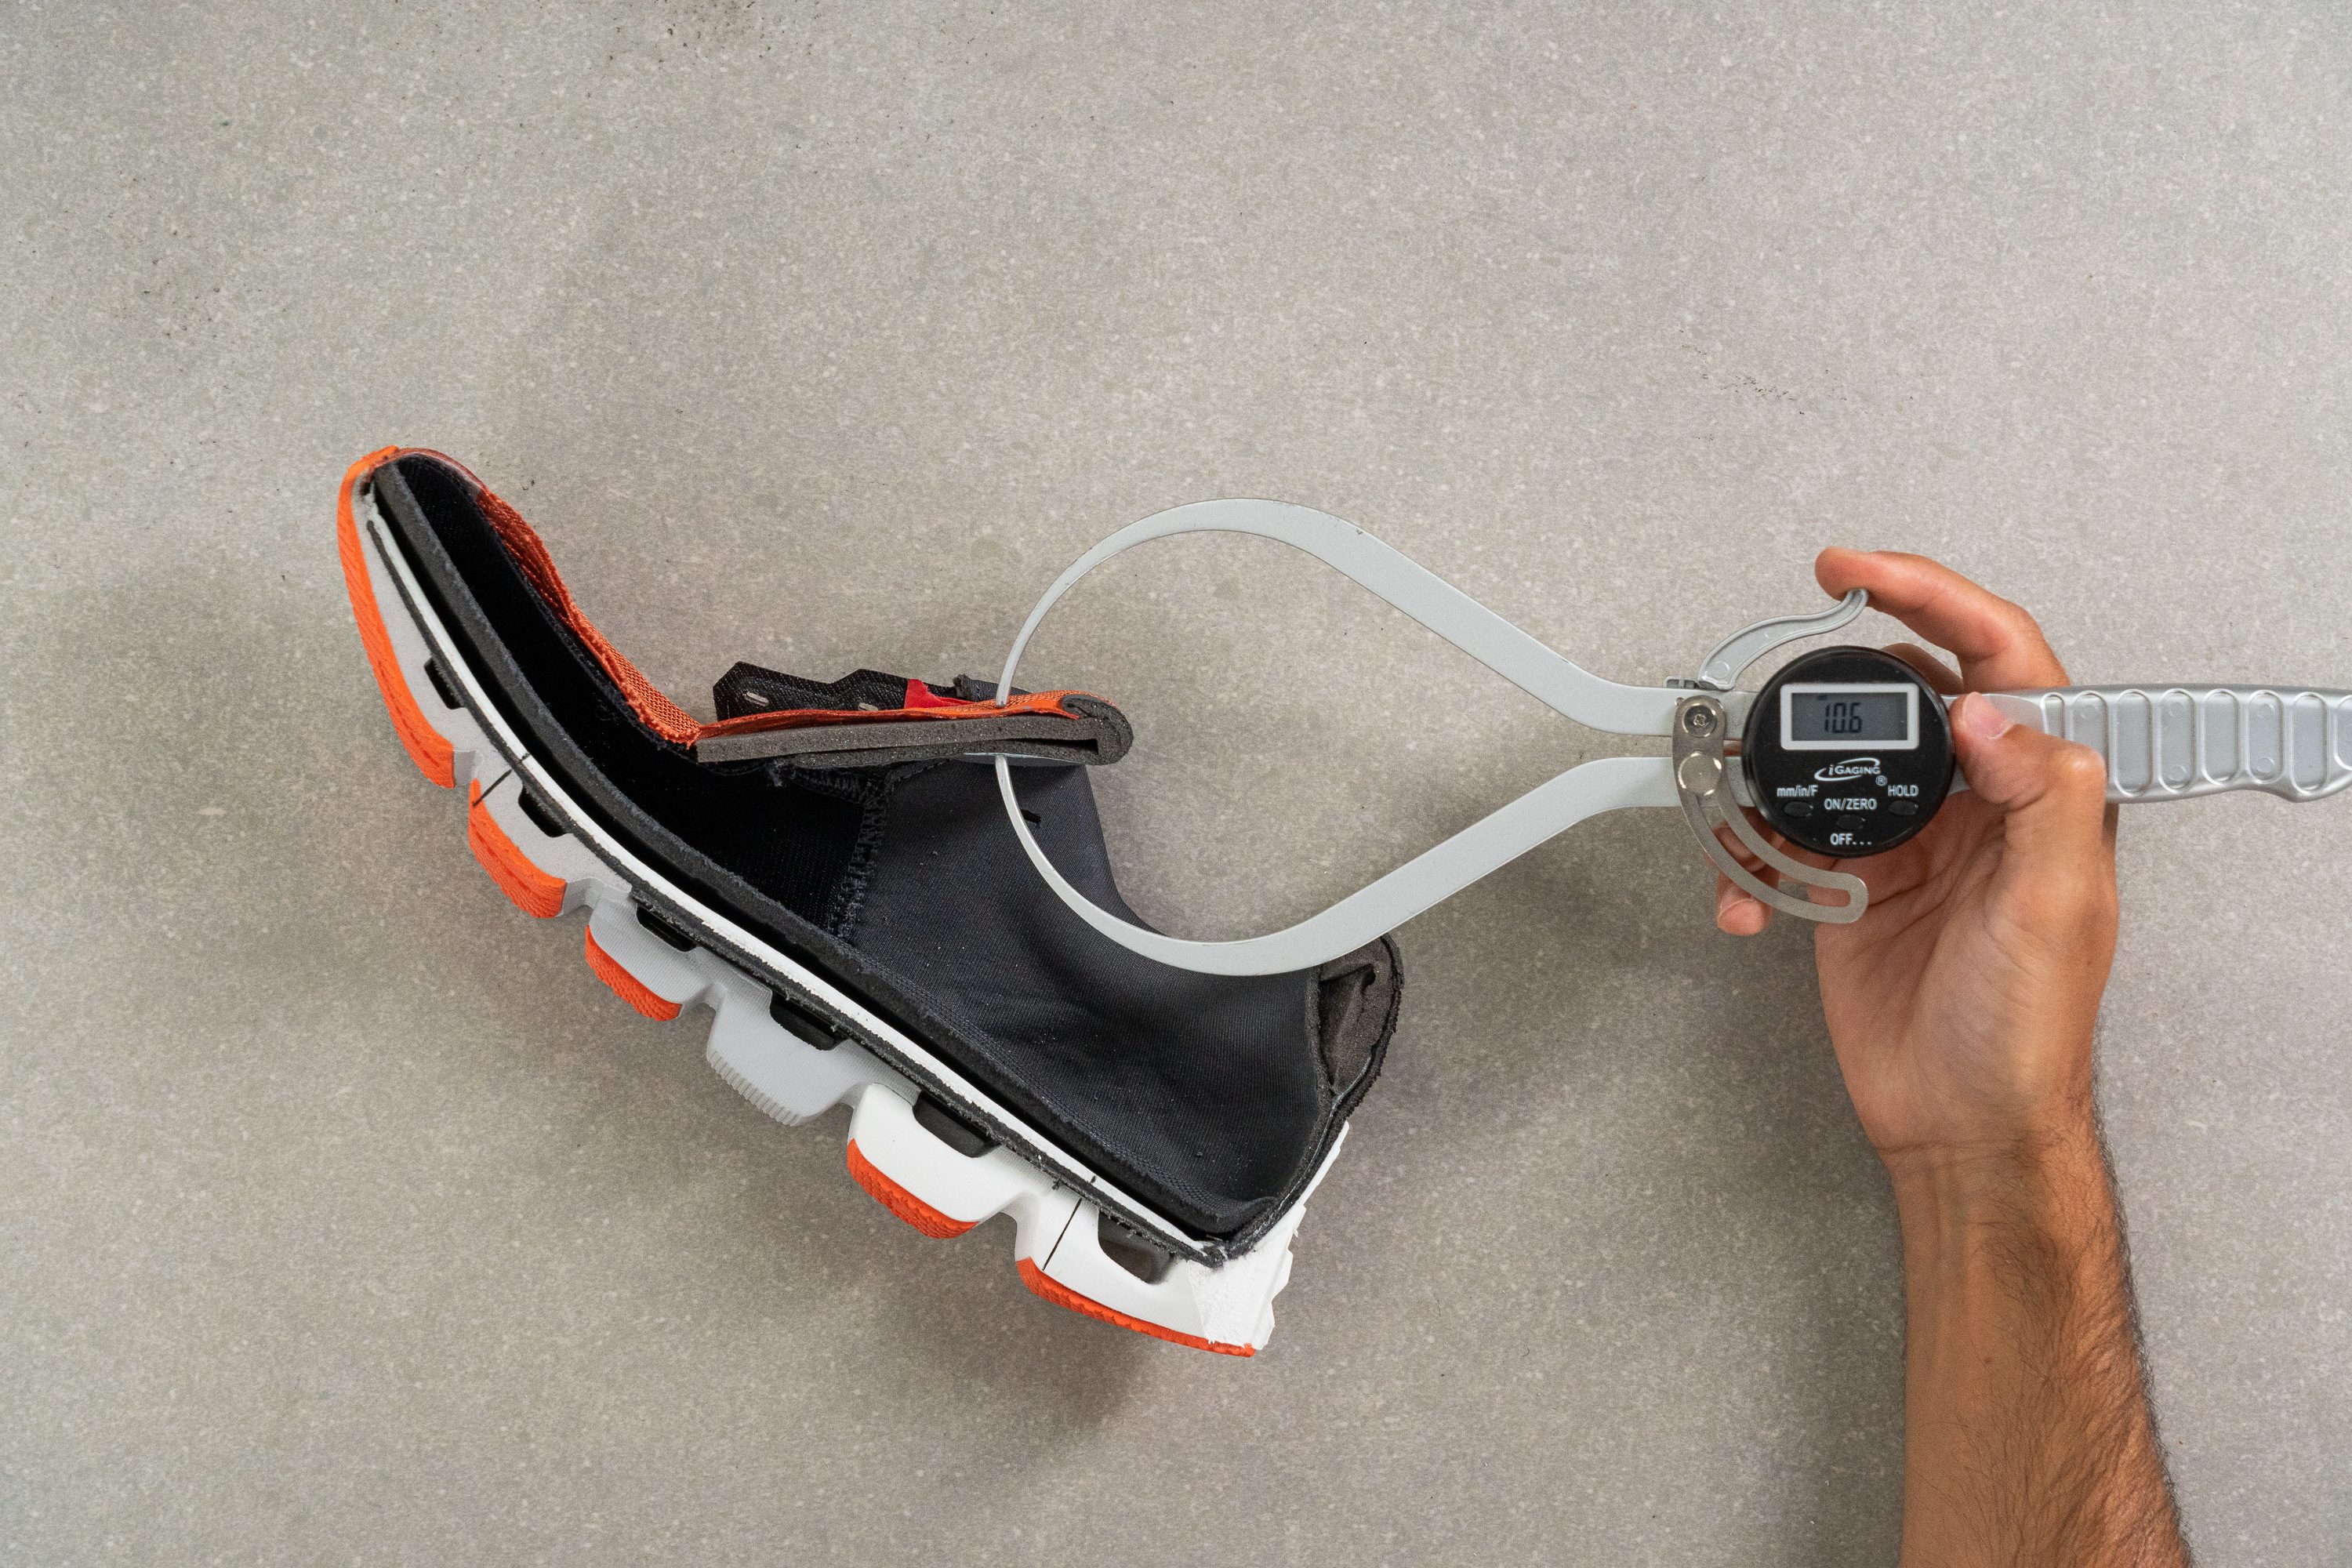 held up, we thought this shoe would be great for solid durability Tongue padding